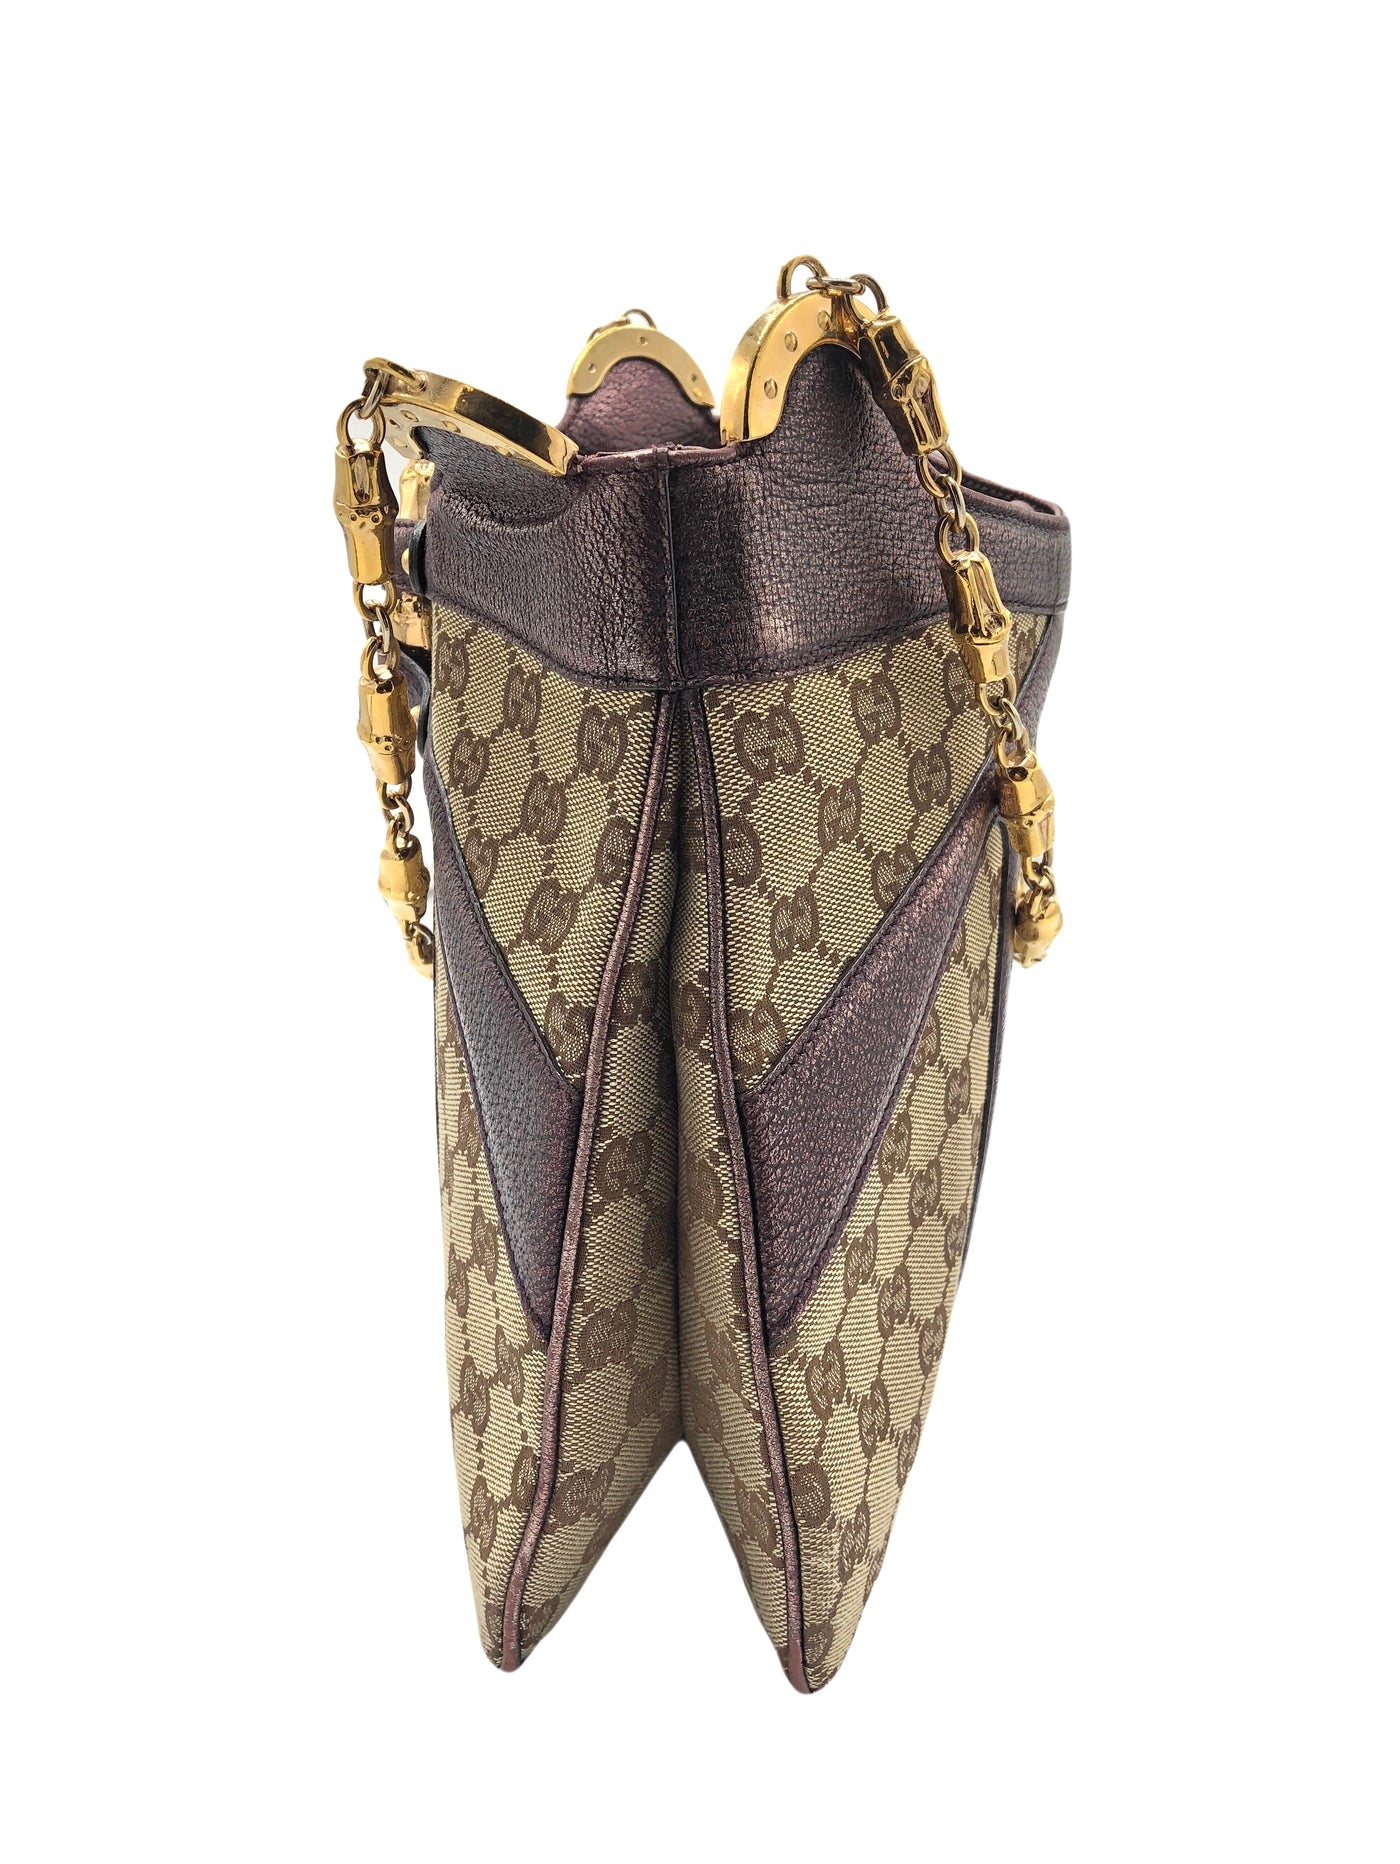 GUCCI by Tom Ford vintage Guccissima Jewelled Bamboo bag